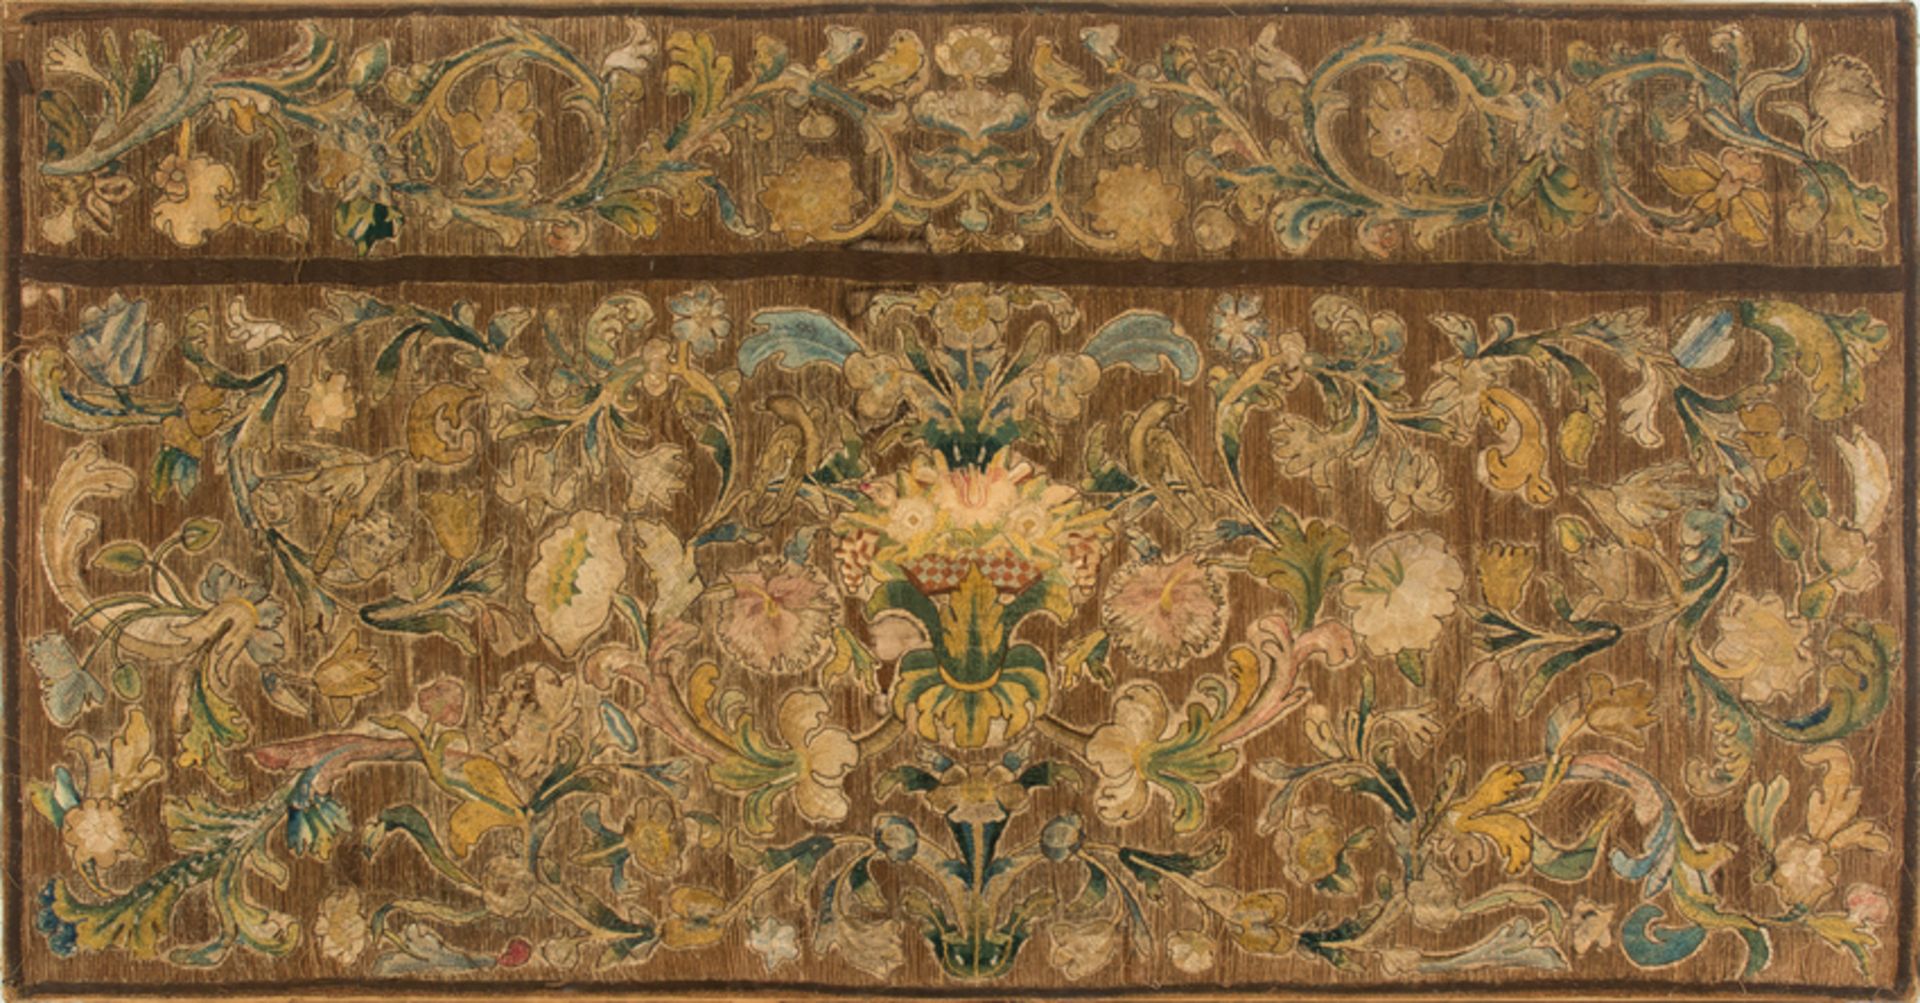 Embroidered antipendium in coloured silk threads. Spain or Italy. 17th century.